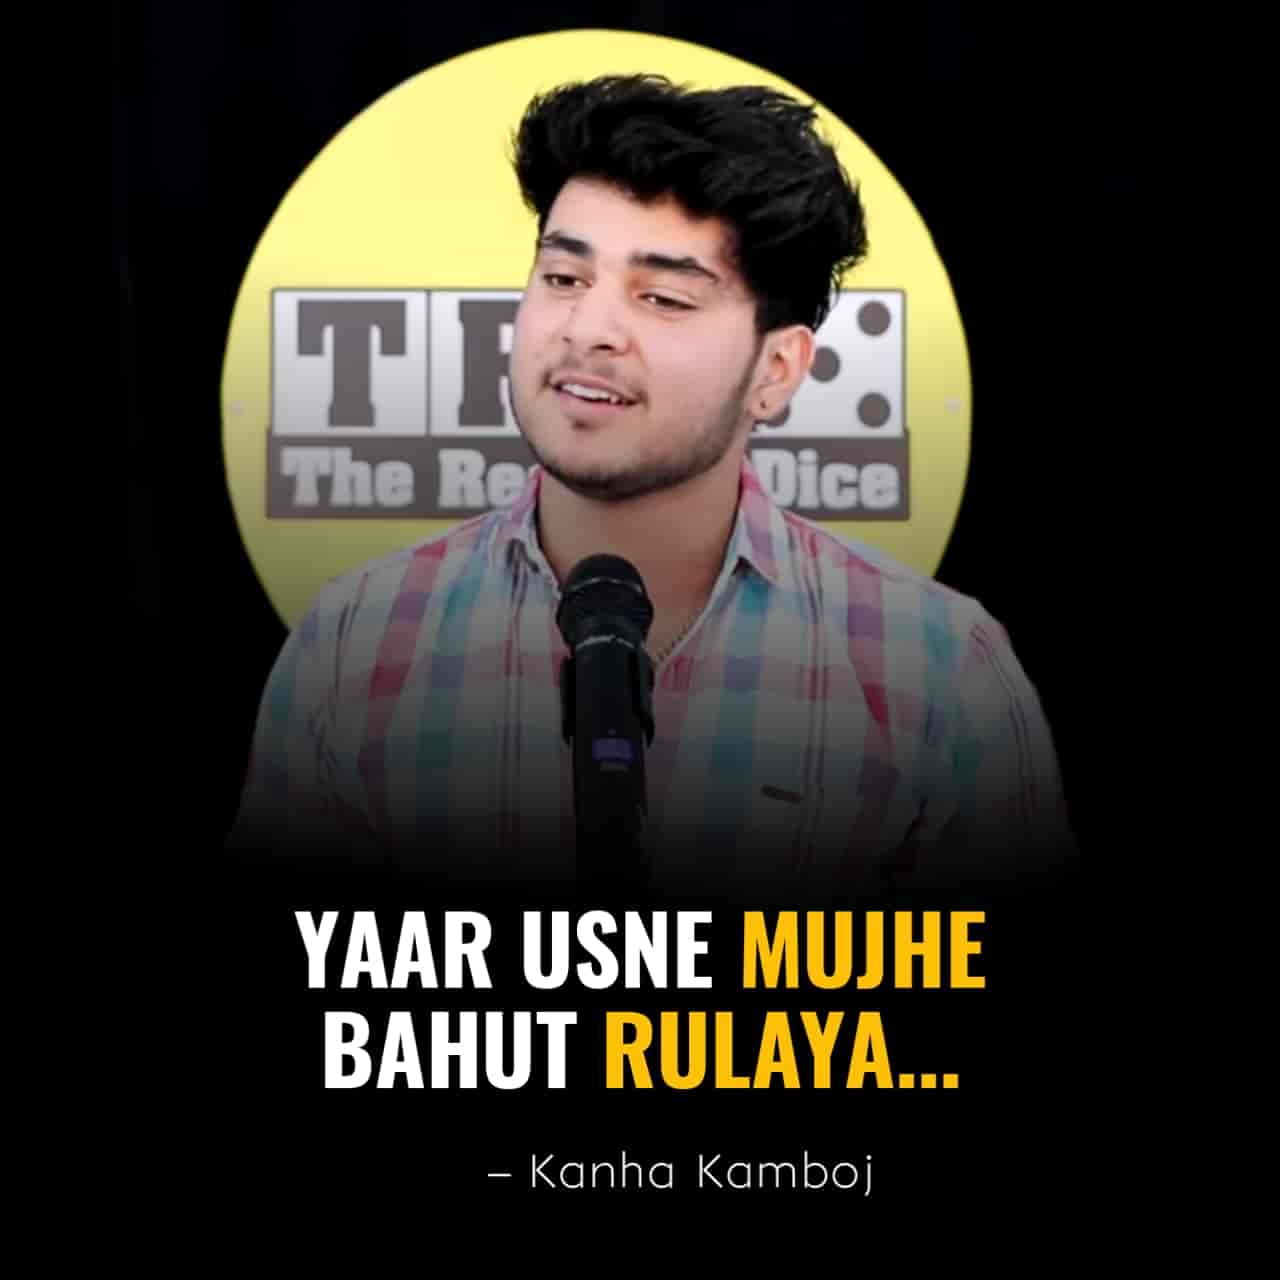 This beautiful Poetry  'Yaar Usne Mujhe Bahut Rulaya' for The Realistic Dice is performed by Kanha Kamboj and also written by him which is very beautiful a piece.